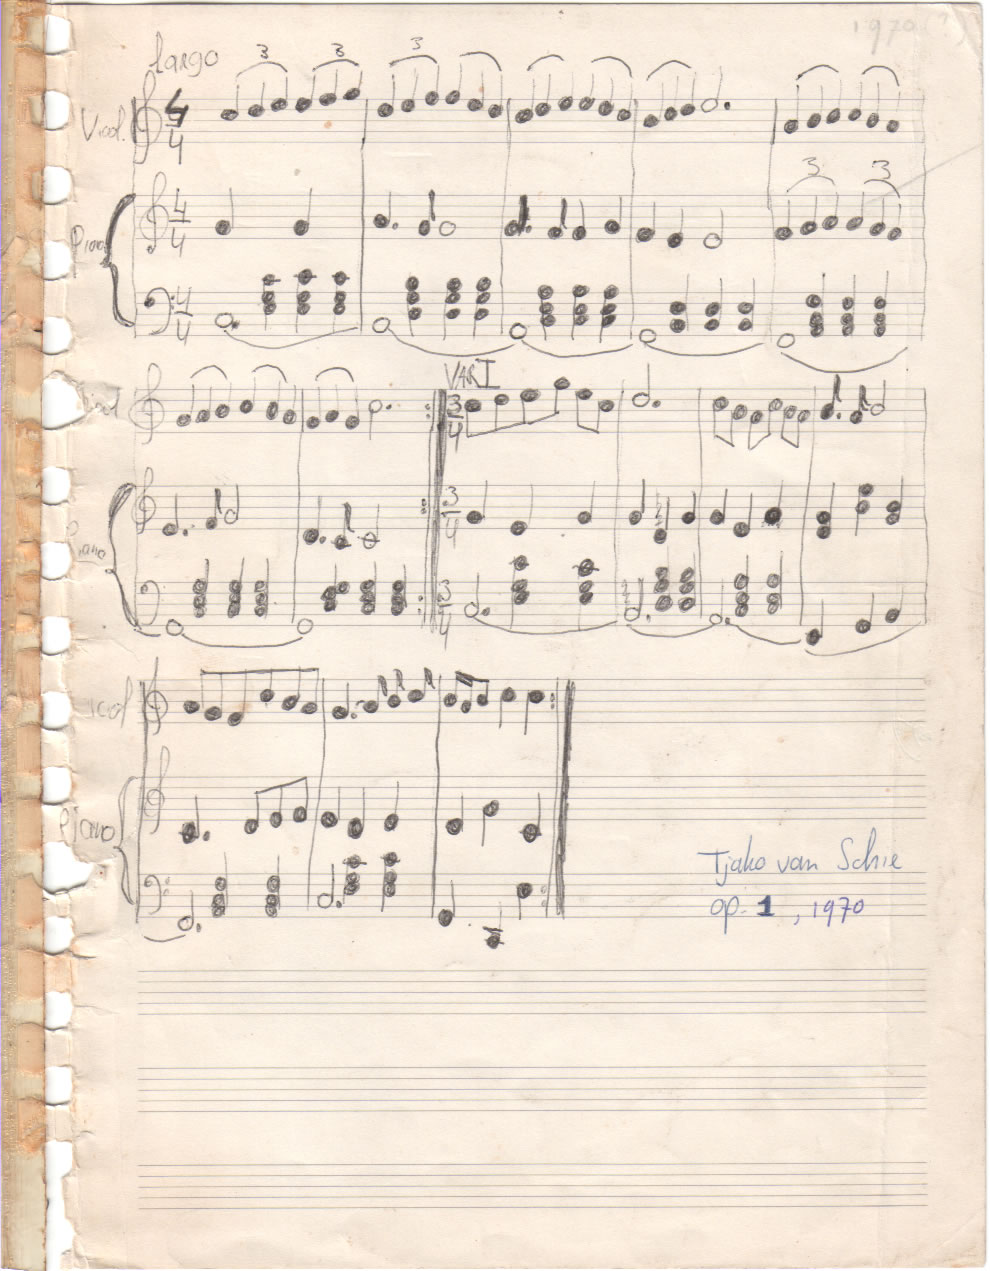 My first composition (age 9)